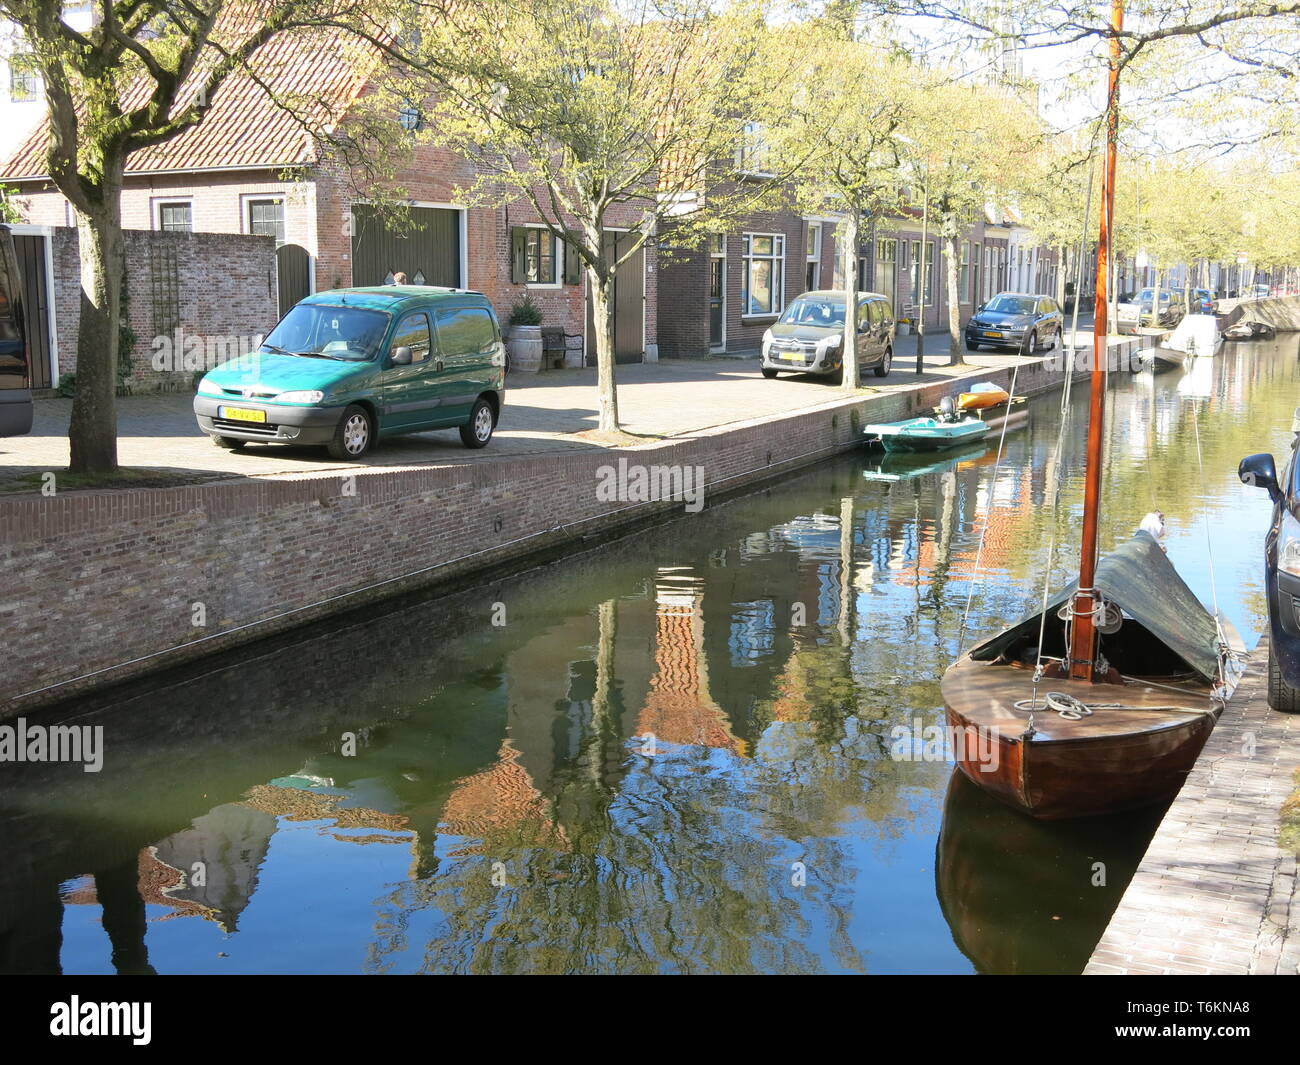 View of one of the canals that runs through the pretty town of Enhuizen, a popular tourist destination in North Holland; April 2019 Stock Photo